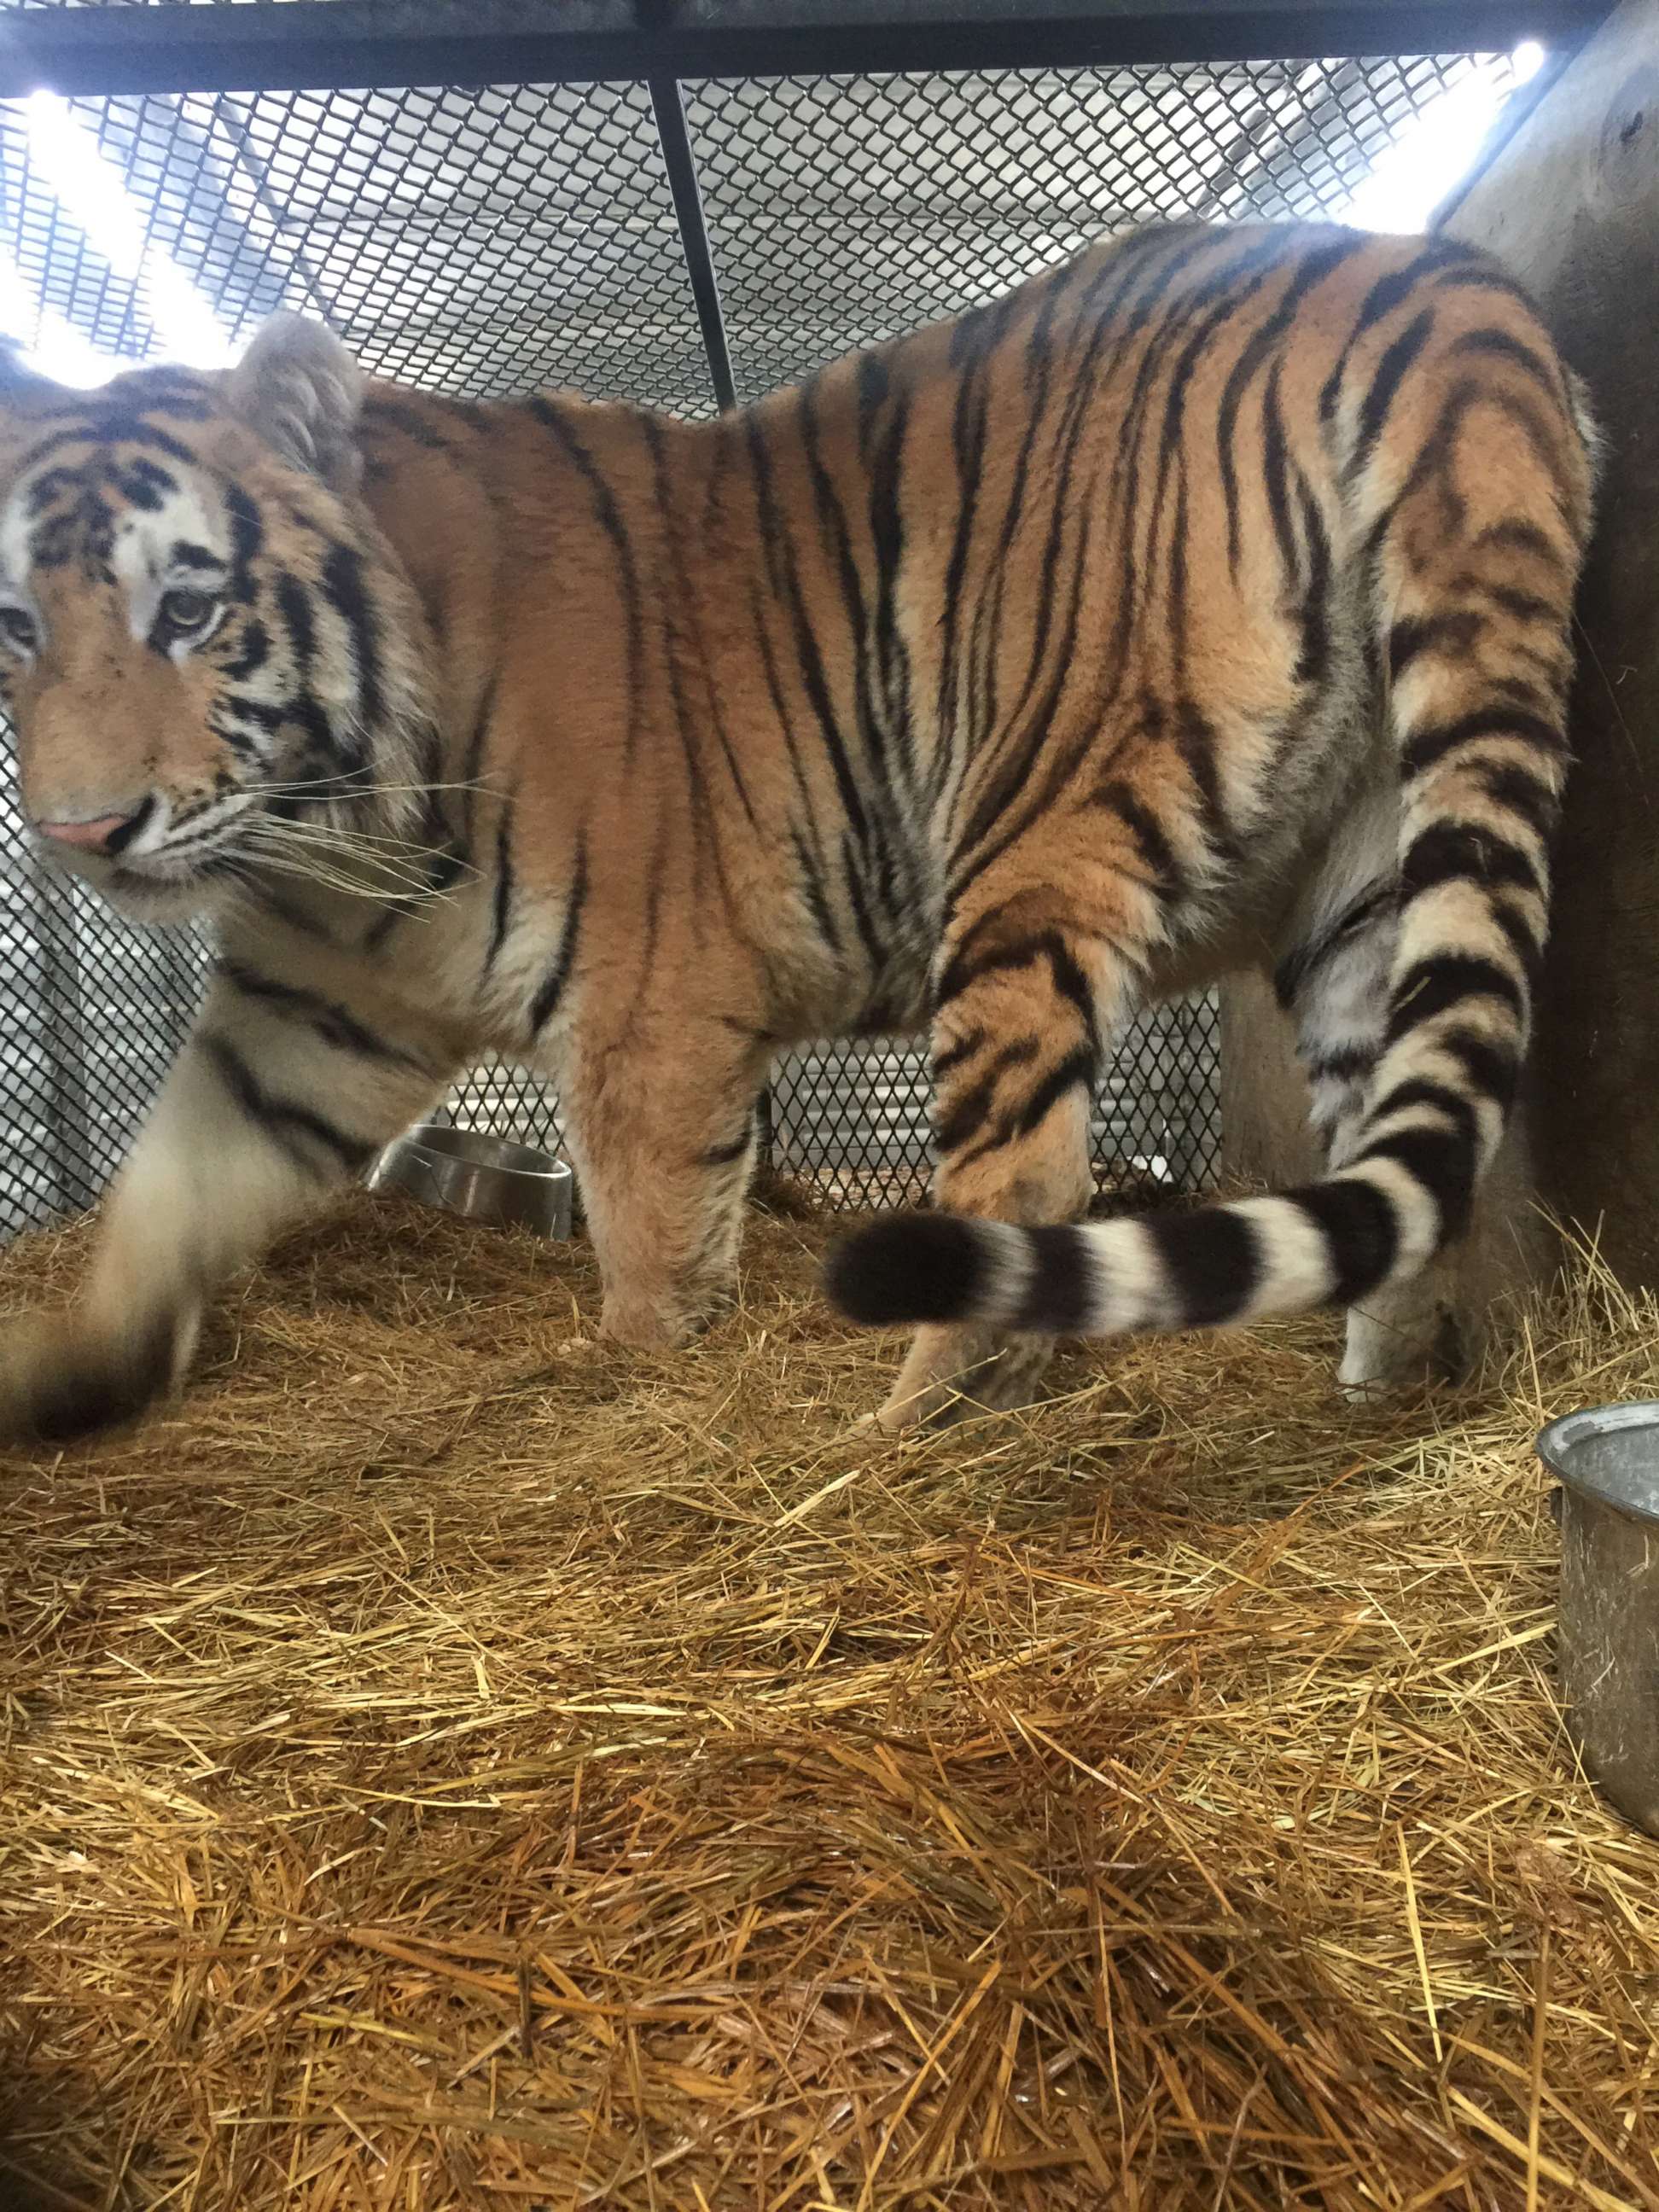 PHOTO: A female tiger recovered from an abandoned home in Houston, Texas is pictured during her relocation to a care facility north of the city, Feb. 12, 2019.